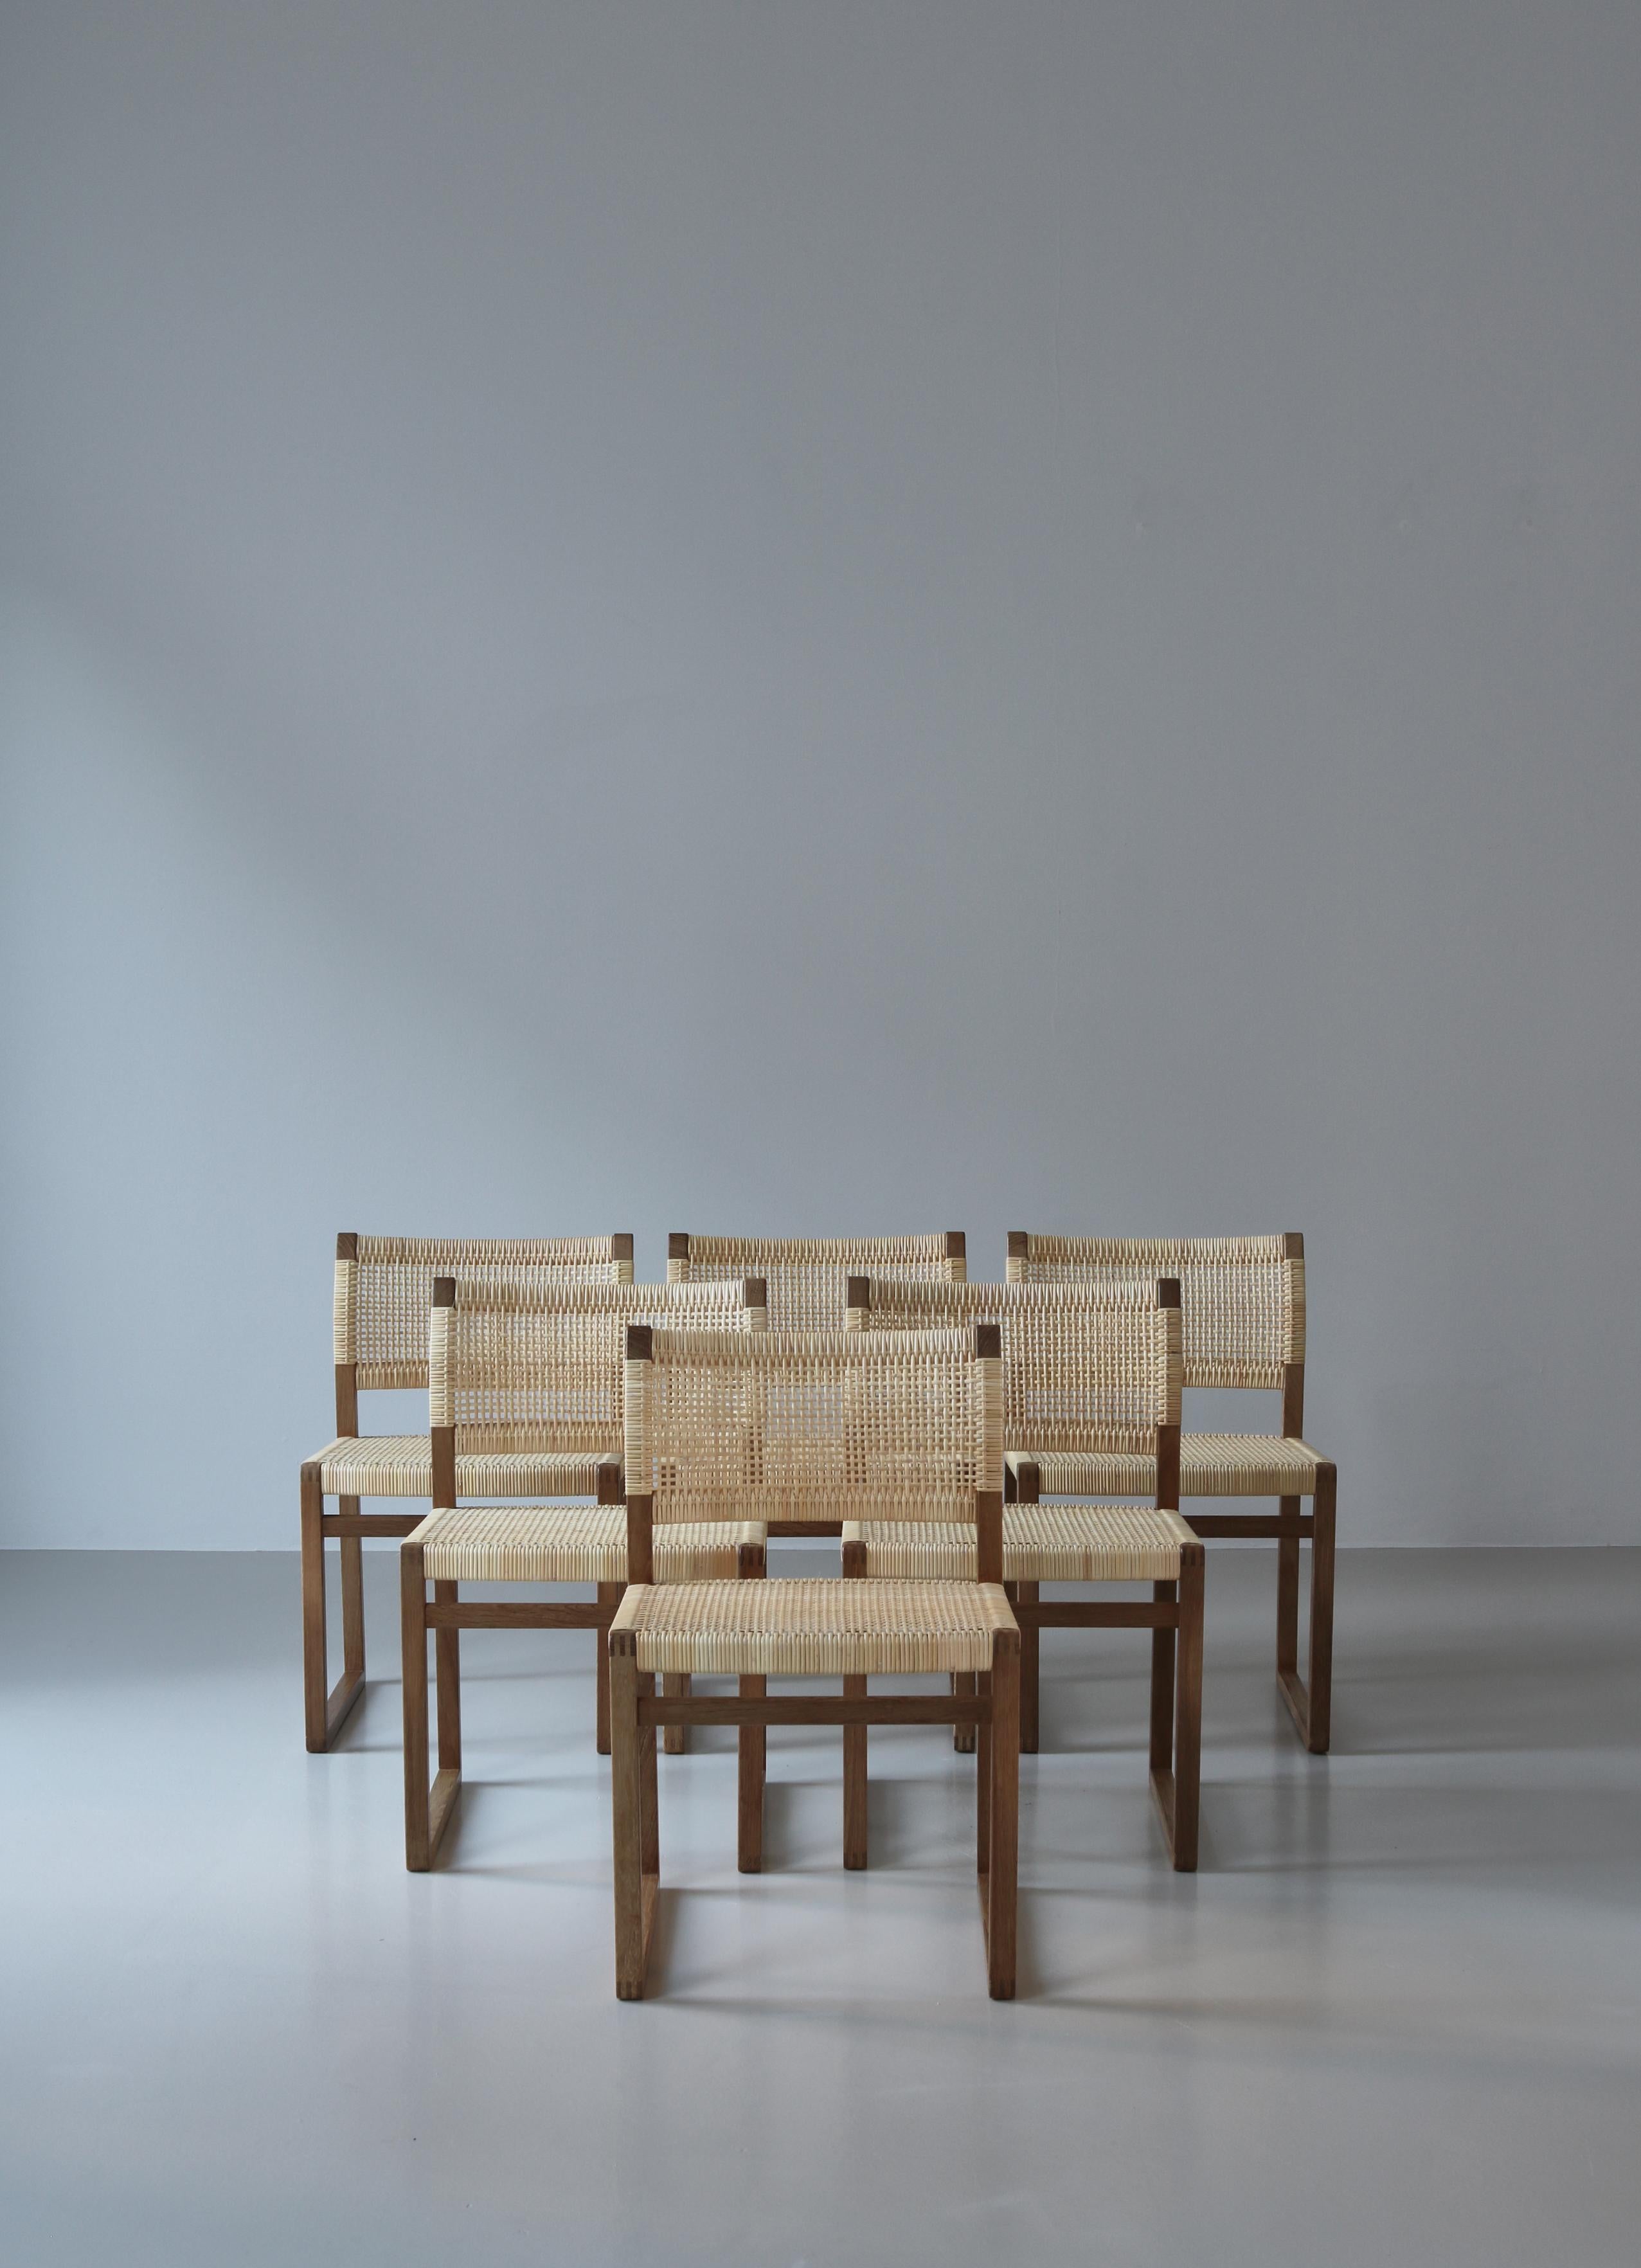 Stunning set of 6 dining chairs in oak and rattan cane designed by Danish designer Børge Mogensen and manufactured at P. Lauritsen & Søn. This set is from the very early production of this iconic chair. All chairs have been rewoven in accordance